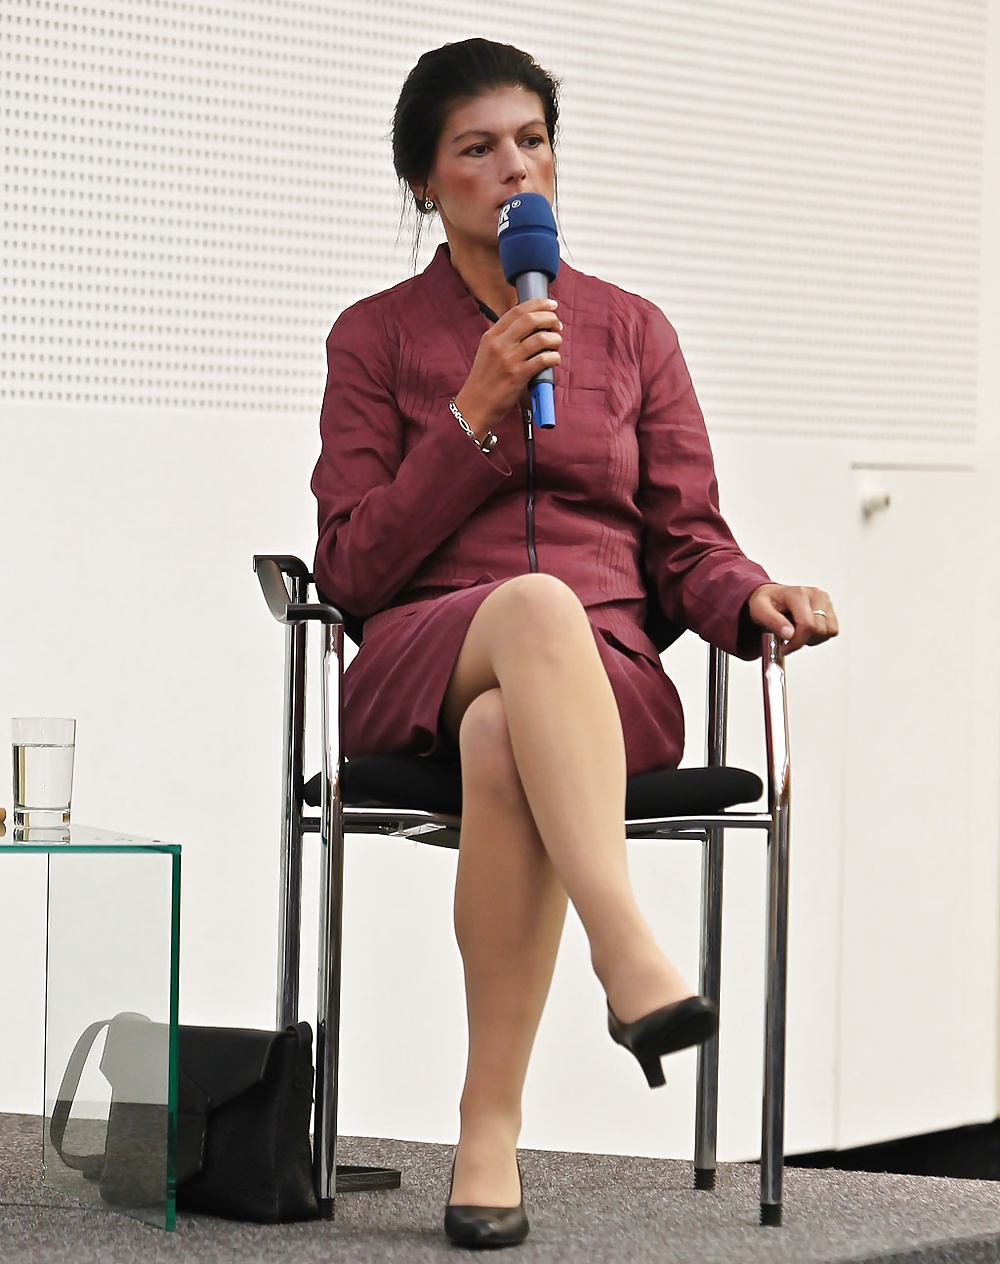 Sahra wagenknecht upskirt - 🧡 Sahra wagenknecht upskirt HOT PICTURES: Sar....